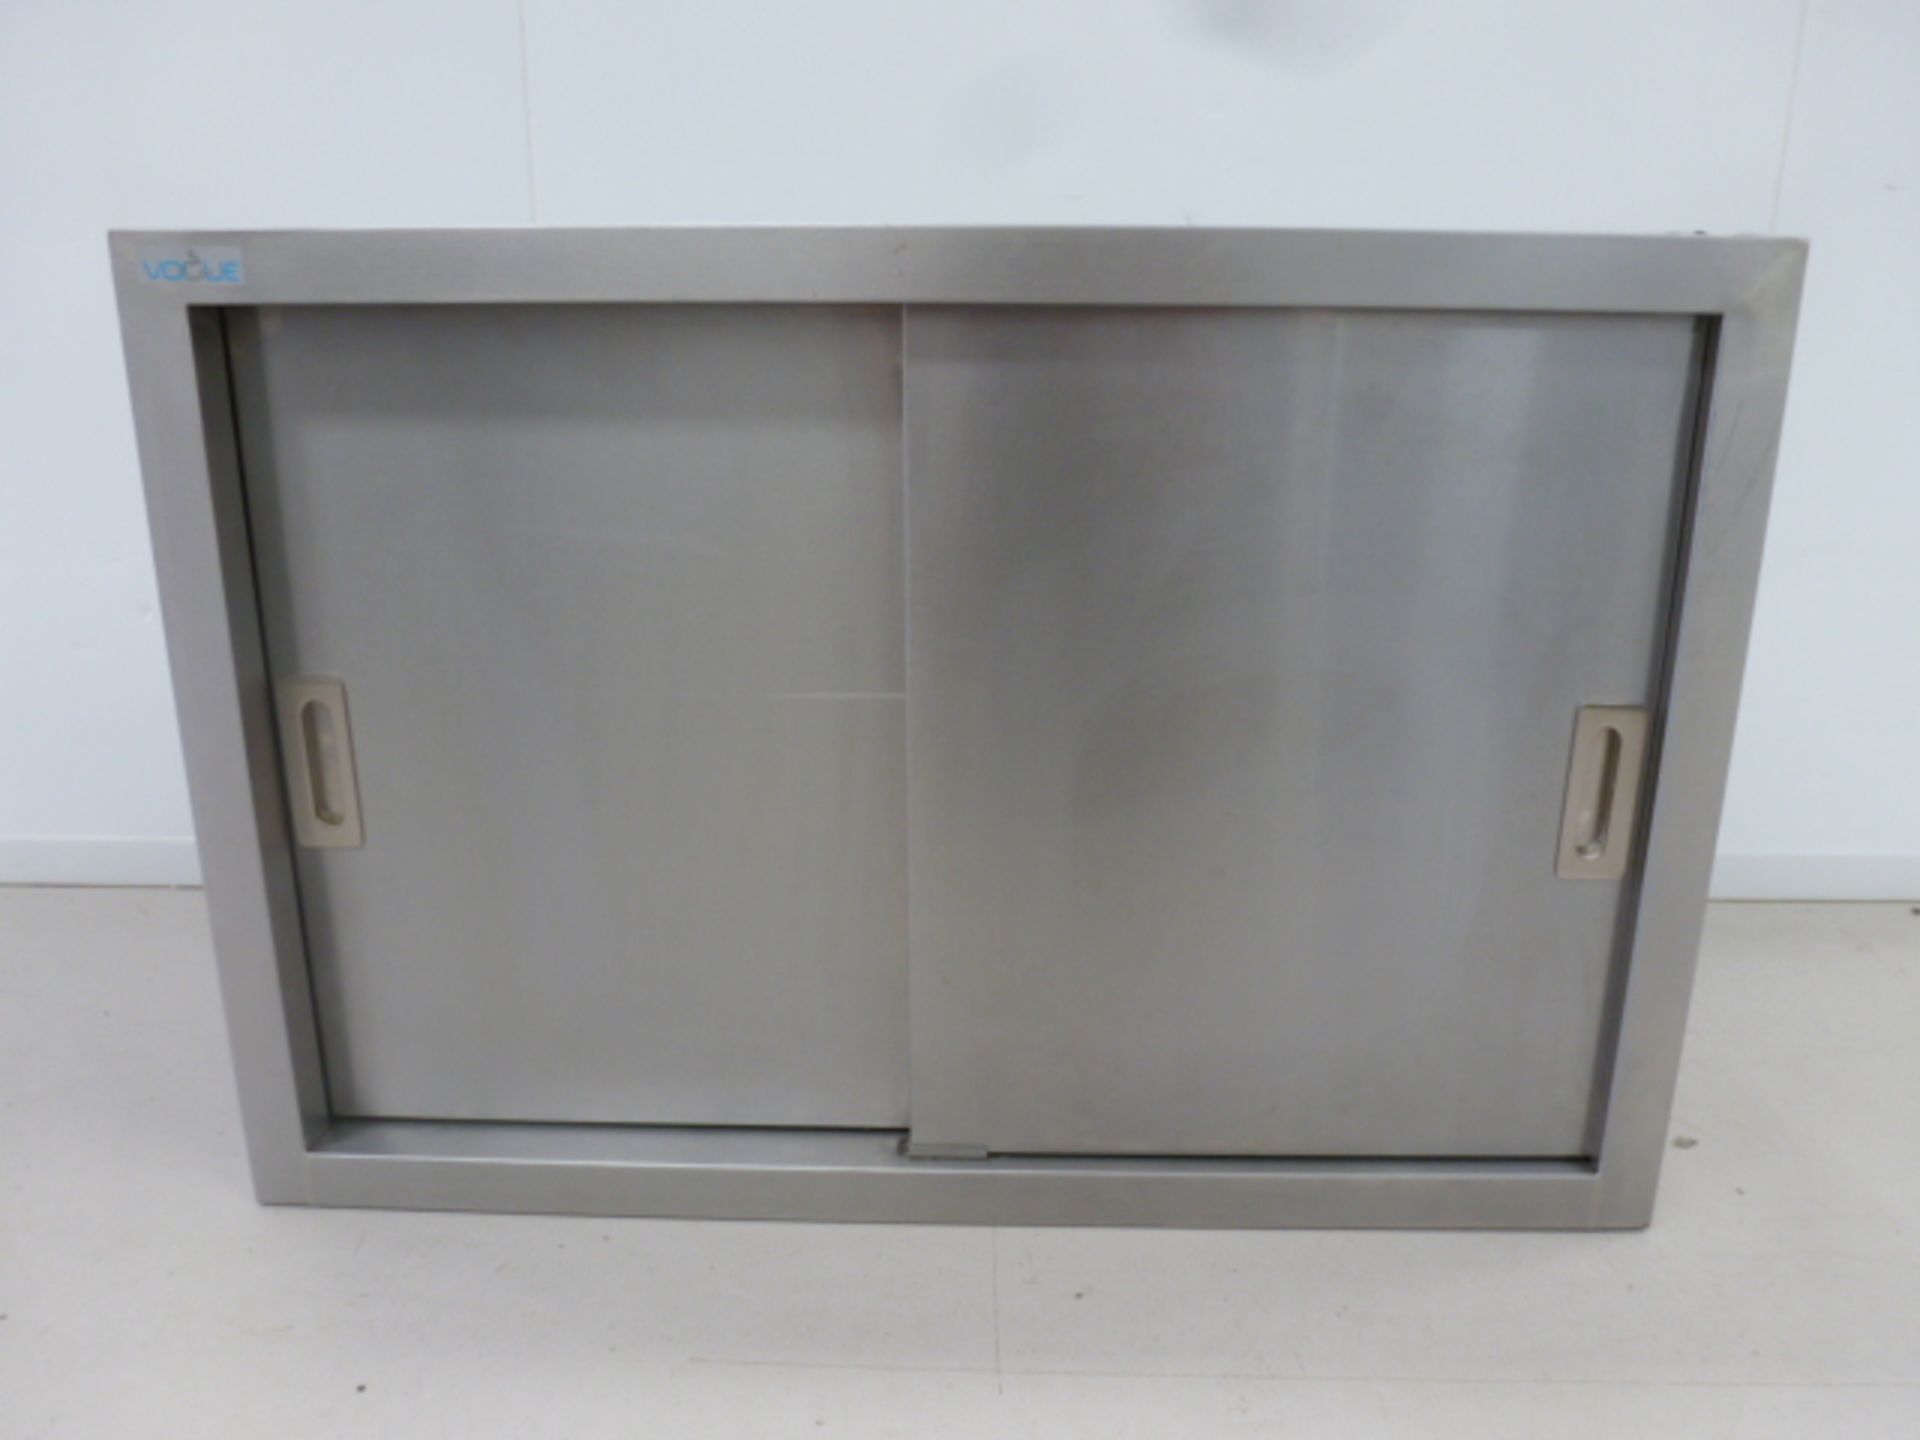 Vogue Stainless Steel Wall Cupboard with 2 Sliding Doors. Size (W) 90cm x (H) 60cm x (D) 30cm.